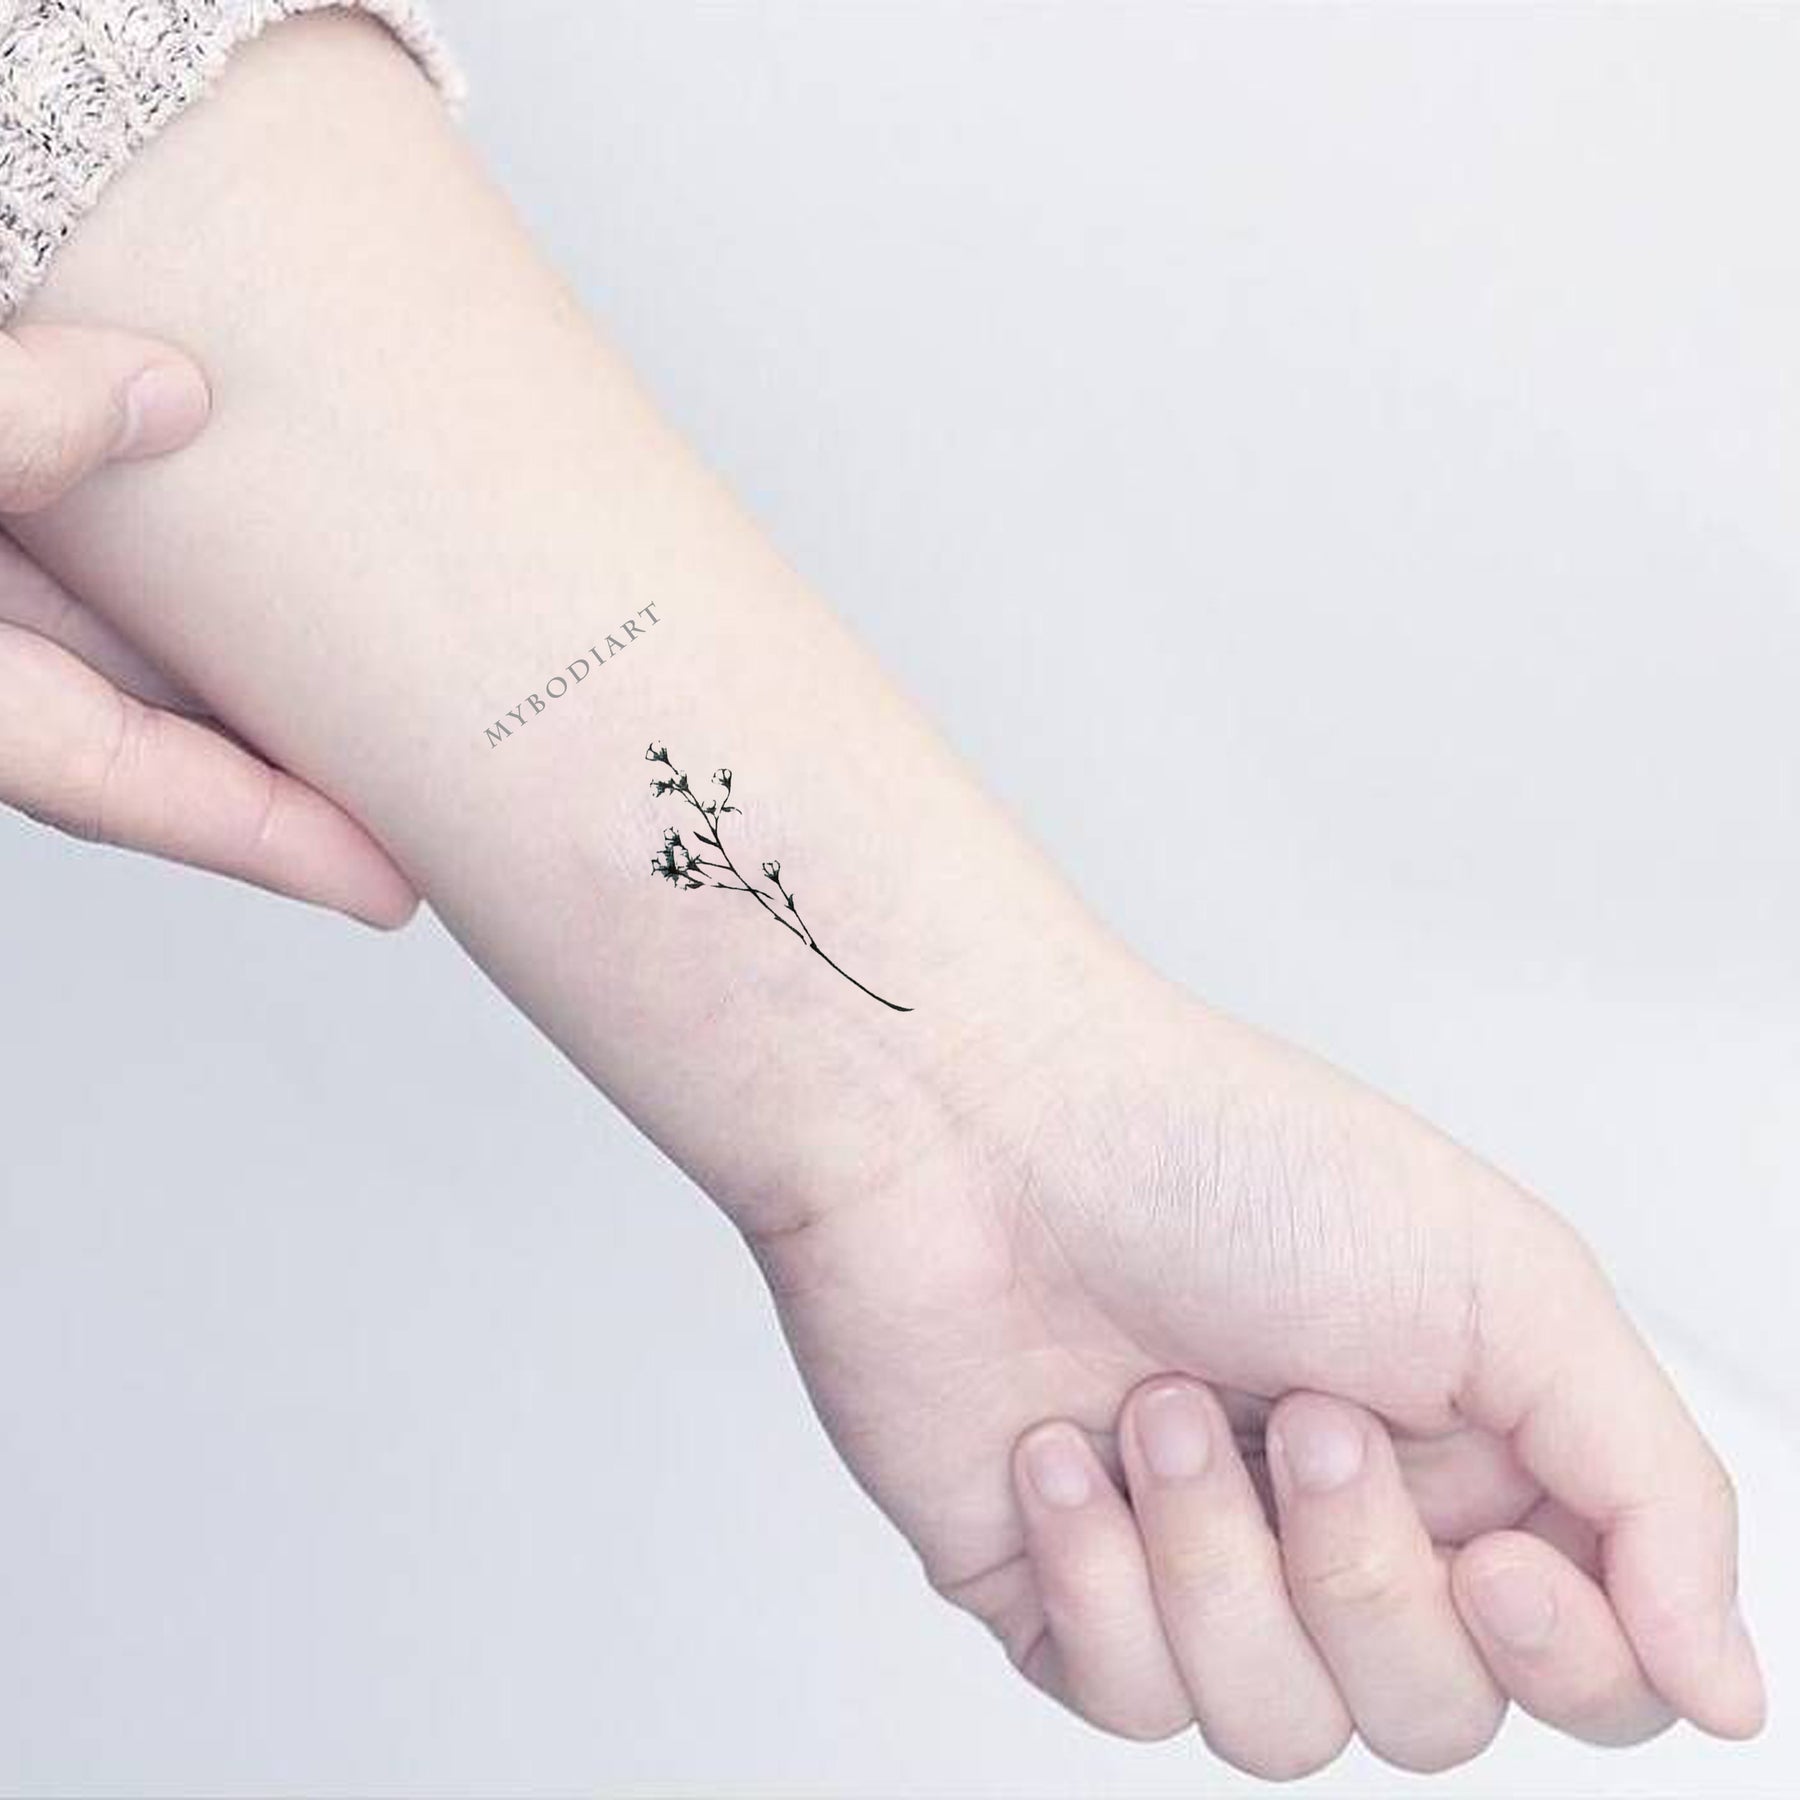 50 Small & Delicate Floral Tattoo Information & Ideas - Brighter Craft % |  Small wrist tattoos, Tiny tattoos for girls, Side wrist tattoos